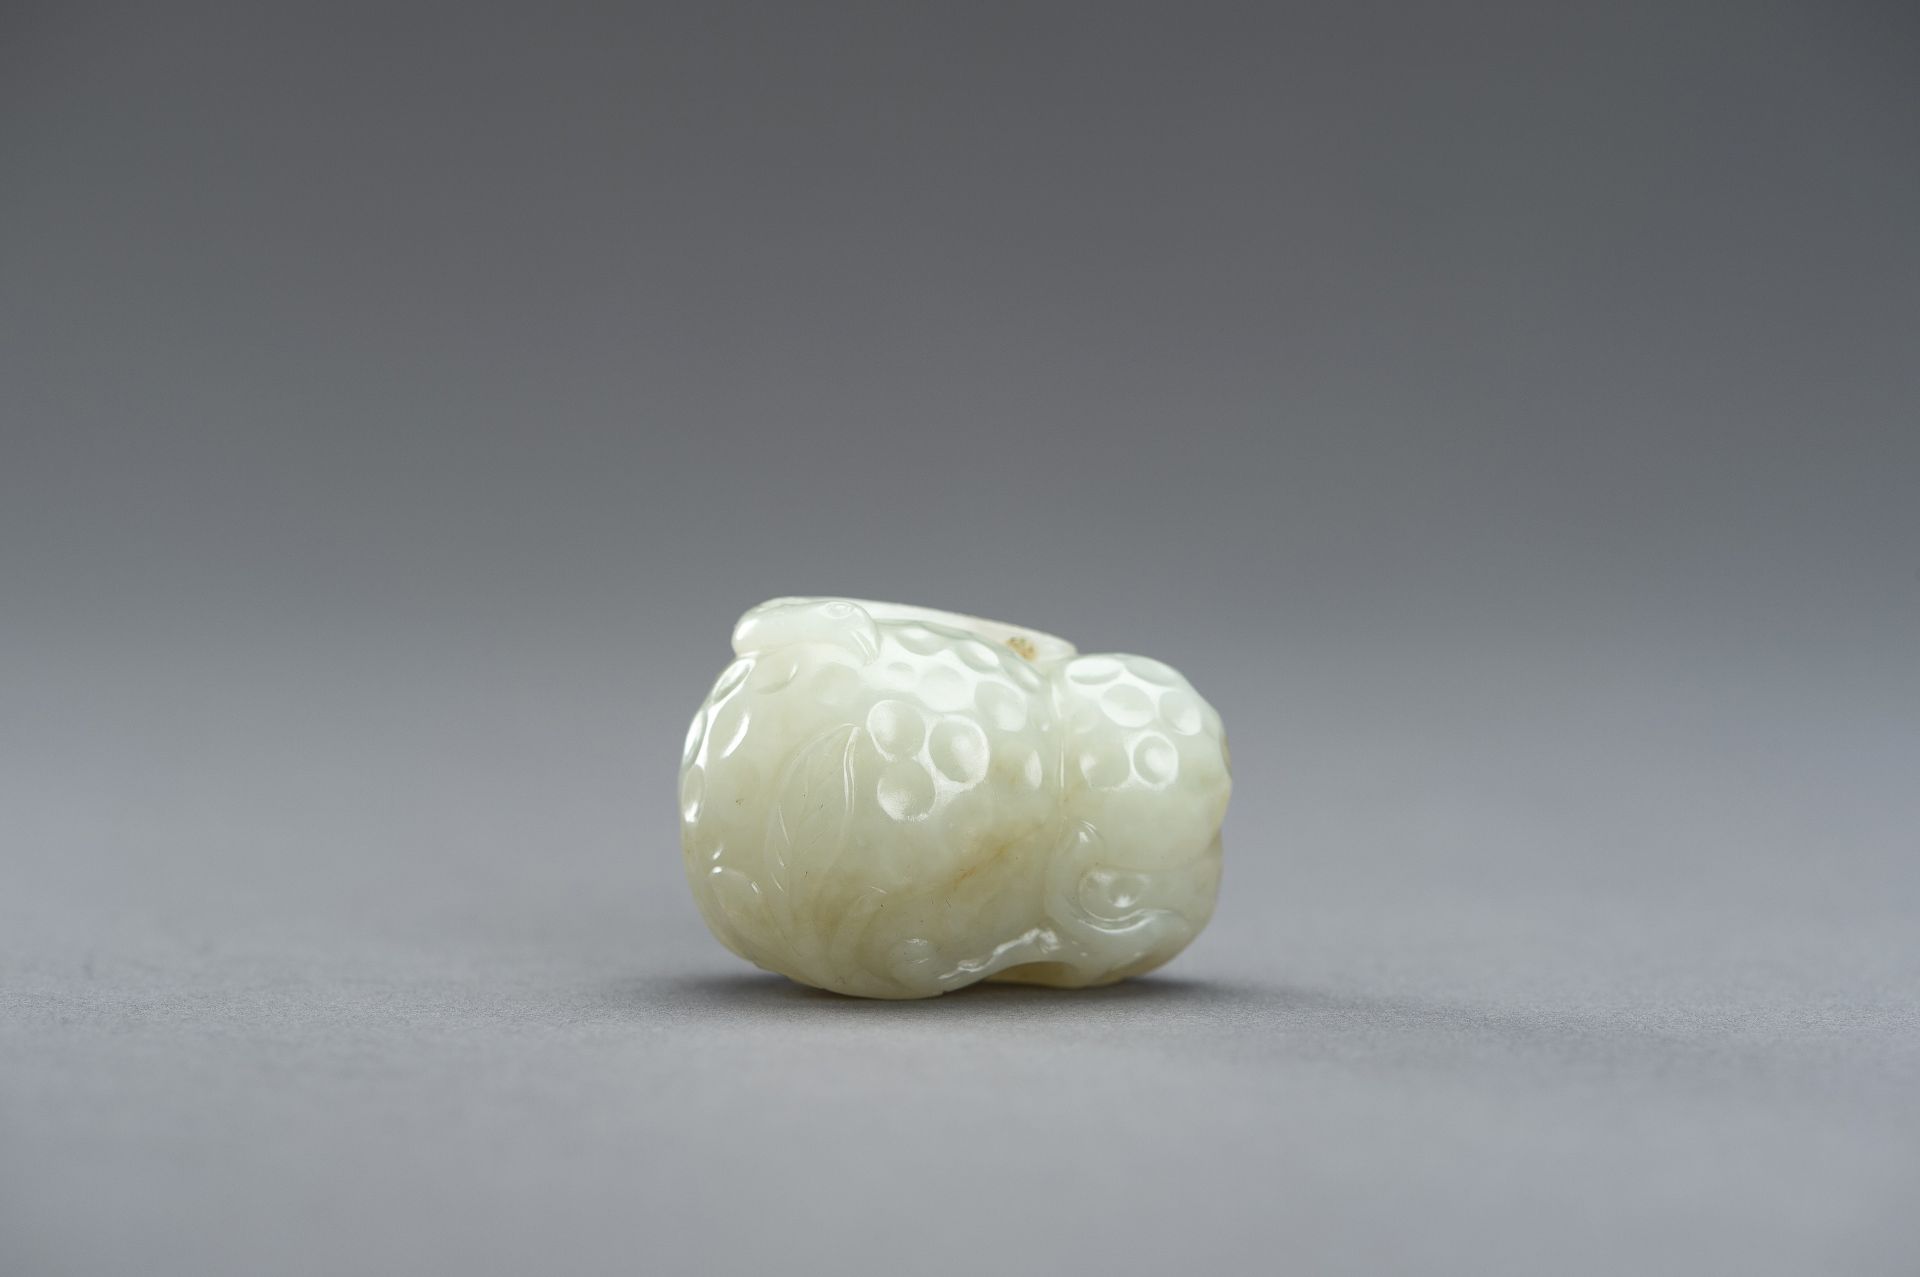 A CELADON JADE PENDANT OF A LYCHEE WITH BIRDS, 1920s - Image 7 of 9